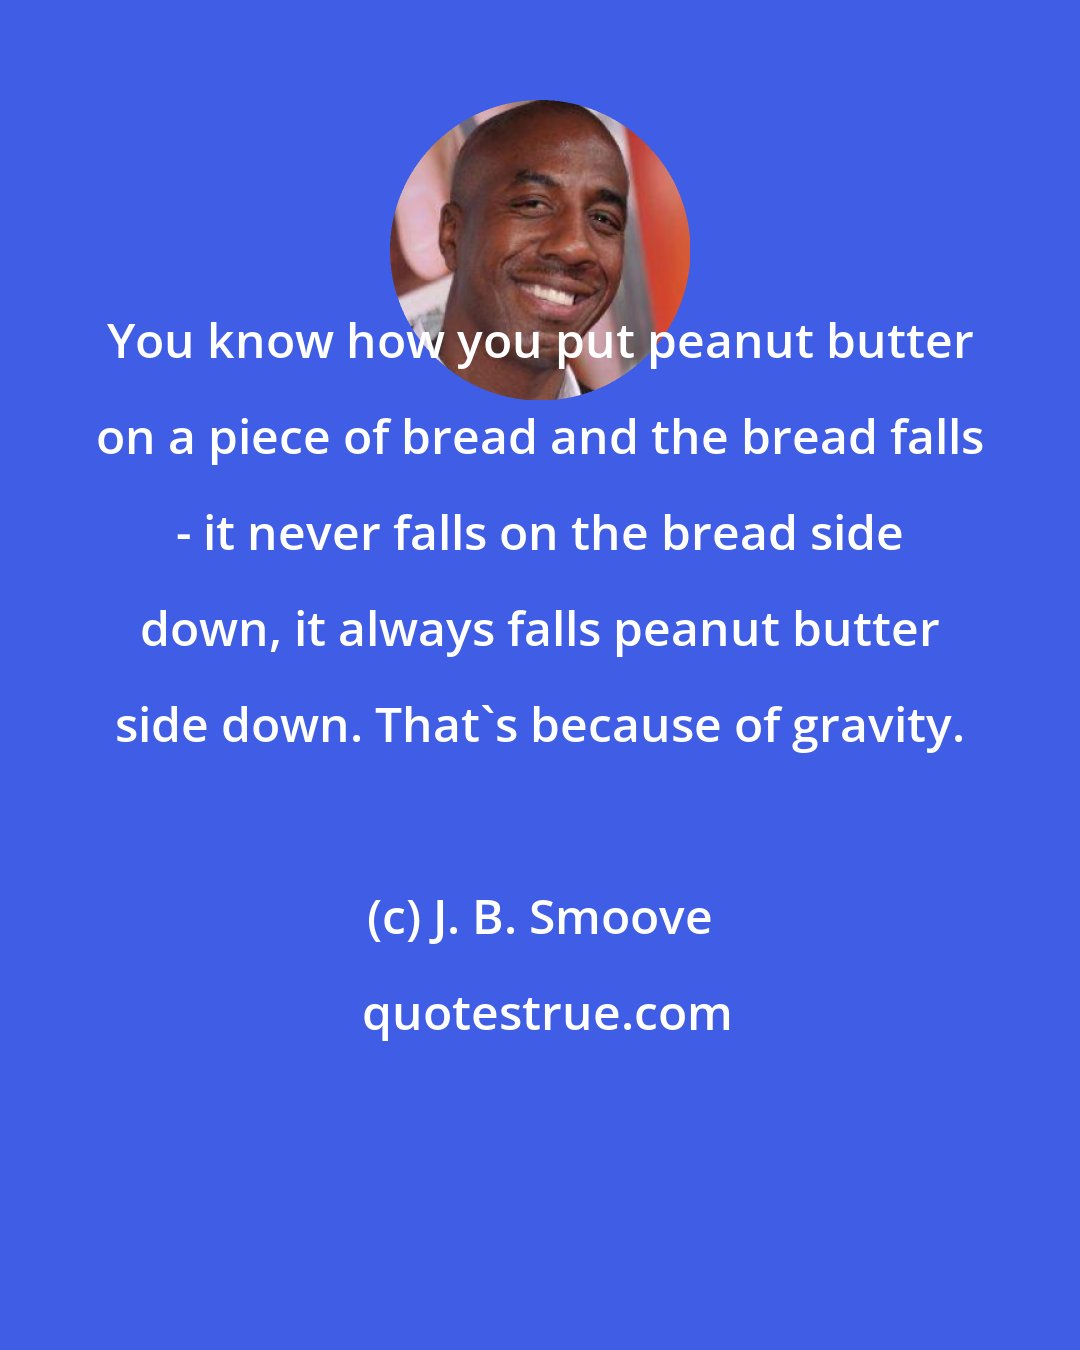 J. B. Smoove: You know how you put peanut butter on a piece of bread and the bread falls - it never falls on the bread side down, it always falls peanut butter side down. That's because of gravity.